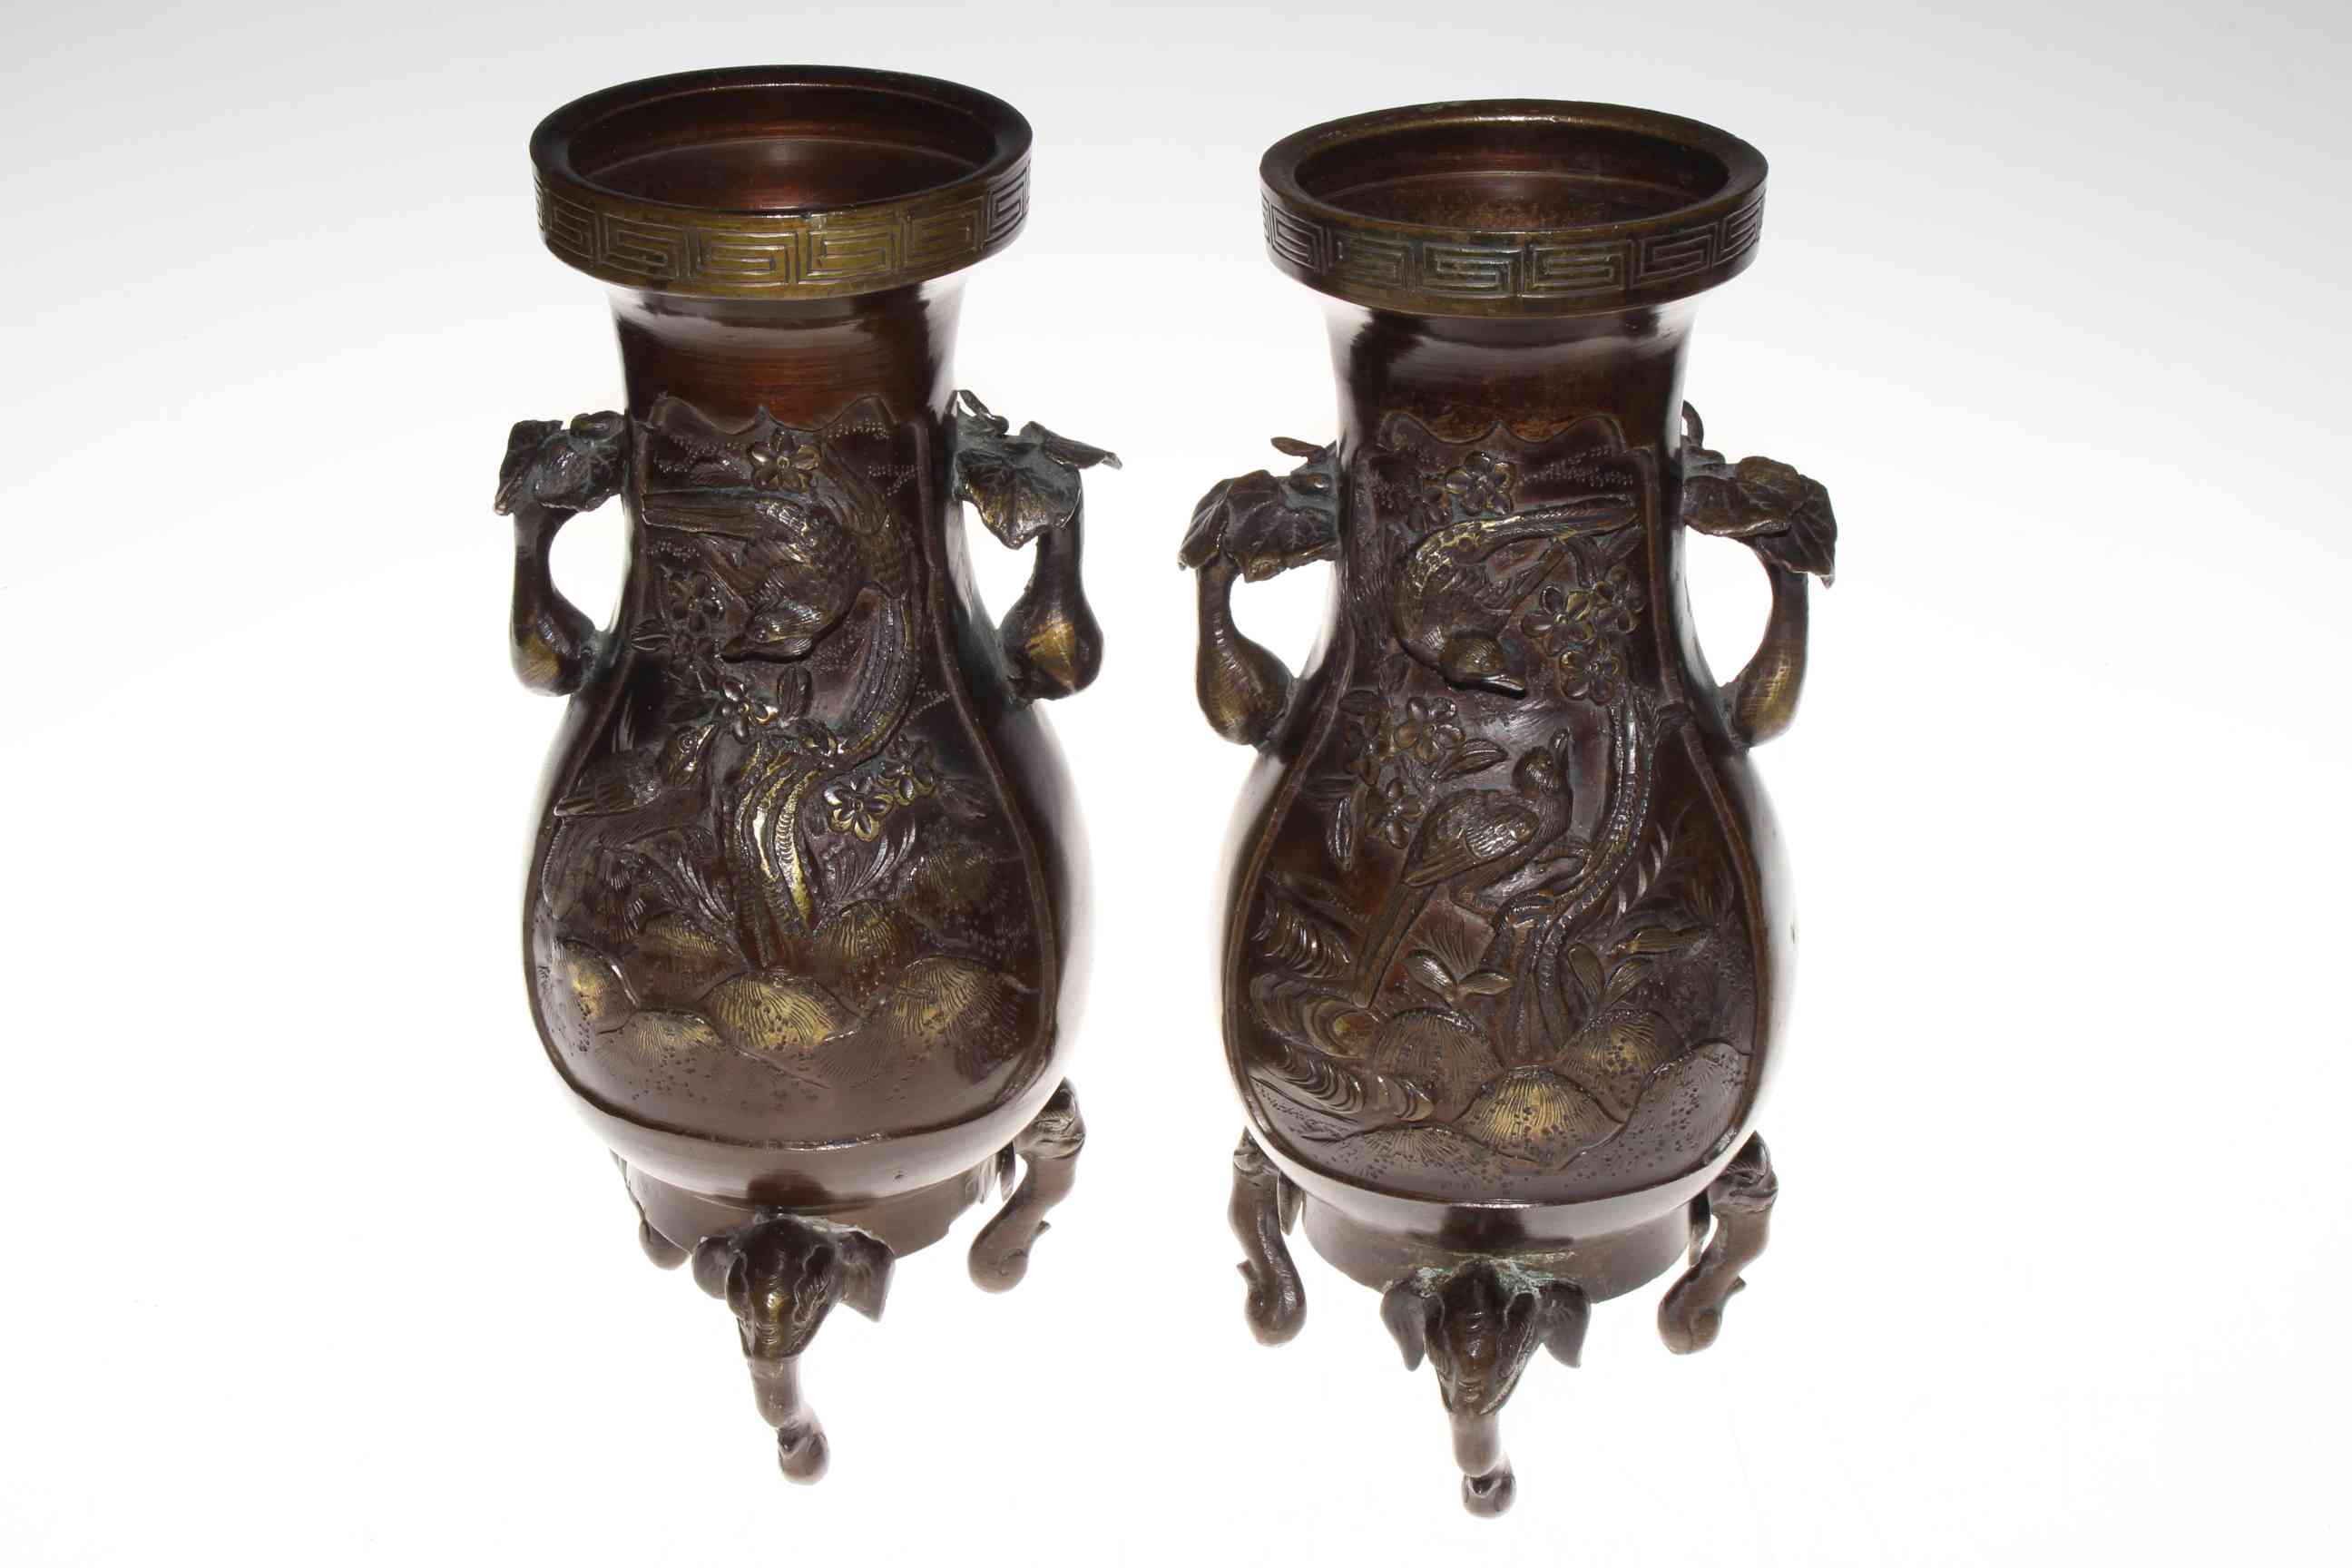 Pair of bronze baluster vases, with relief decoration and on elephant mask legs, 27cm. - Image 2 of 3